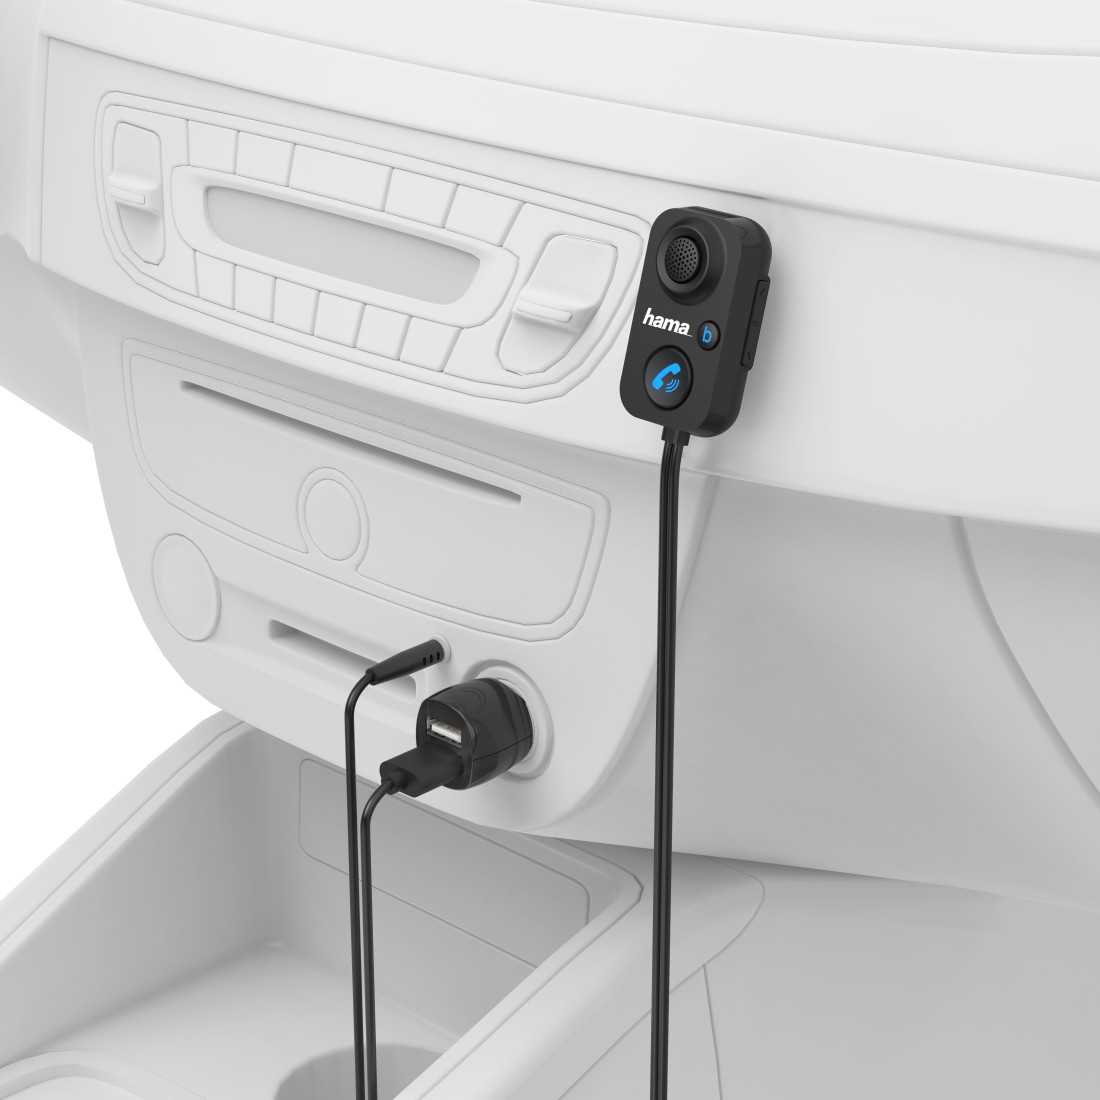 Hama Bluetooth® Hands-Free Device for Cars with AUX-In